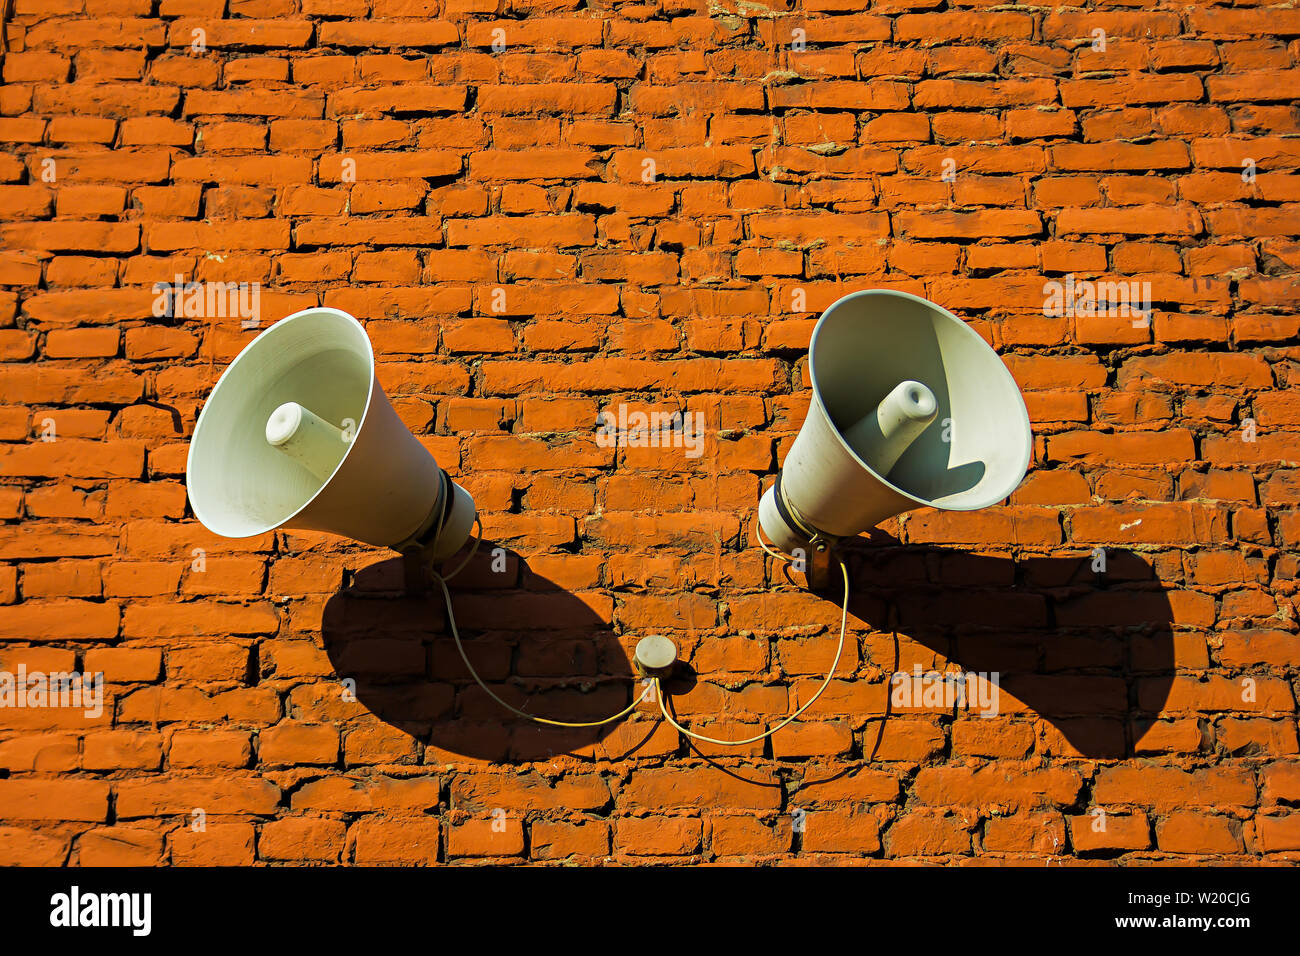 White loudspeakers attached to a red brick wall, background Stock Photo